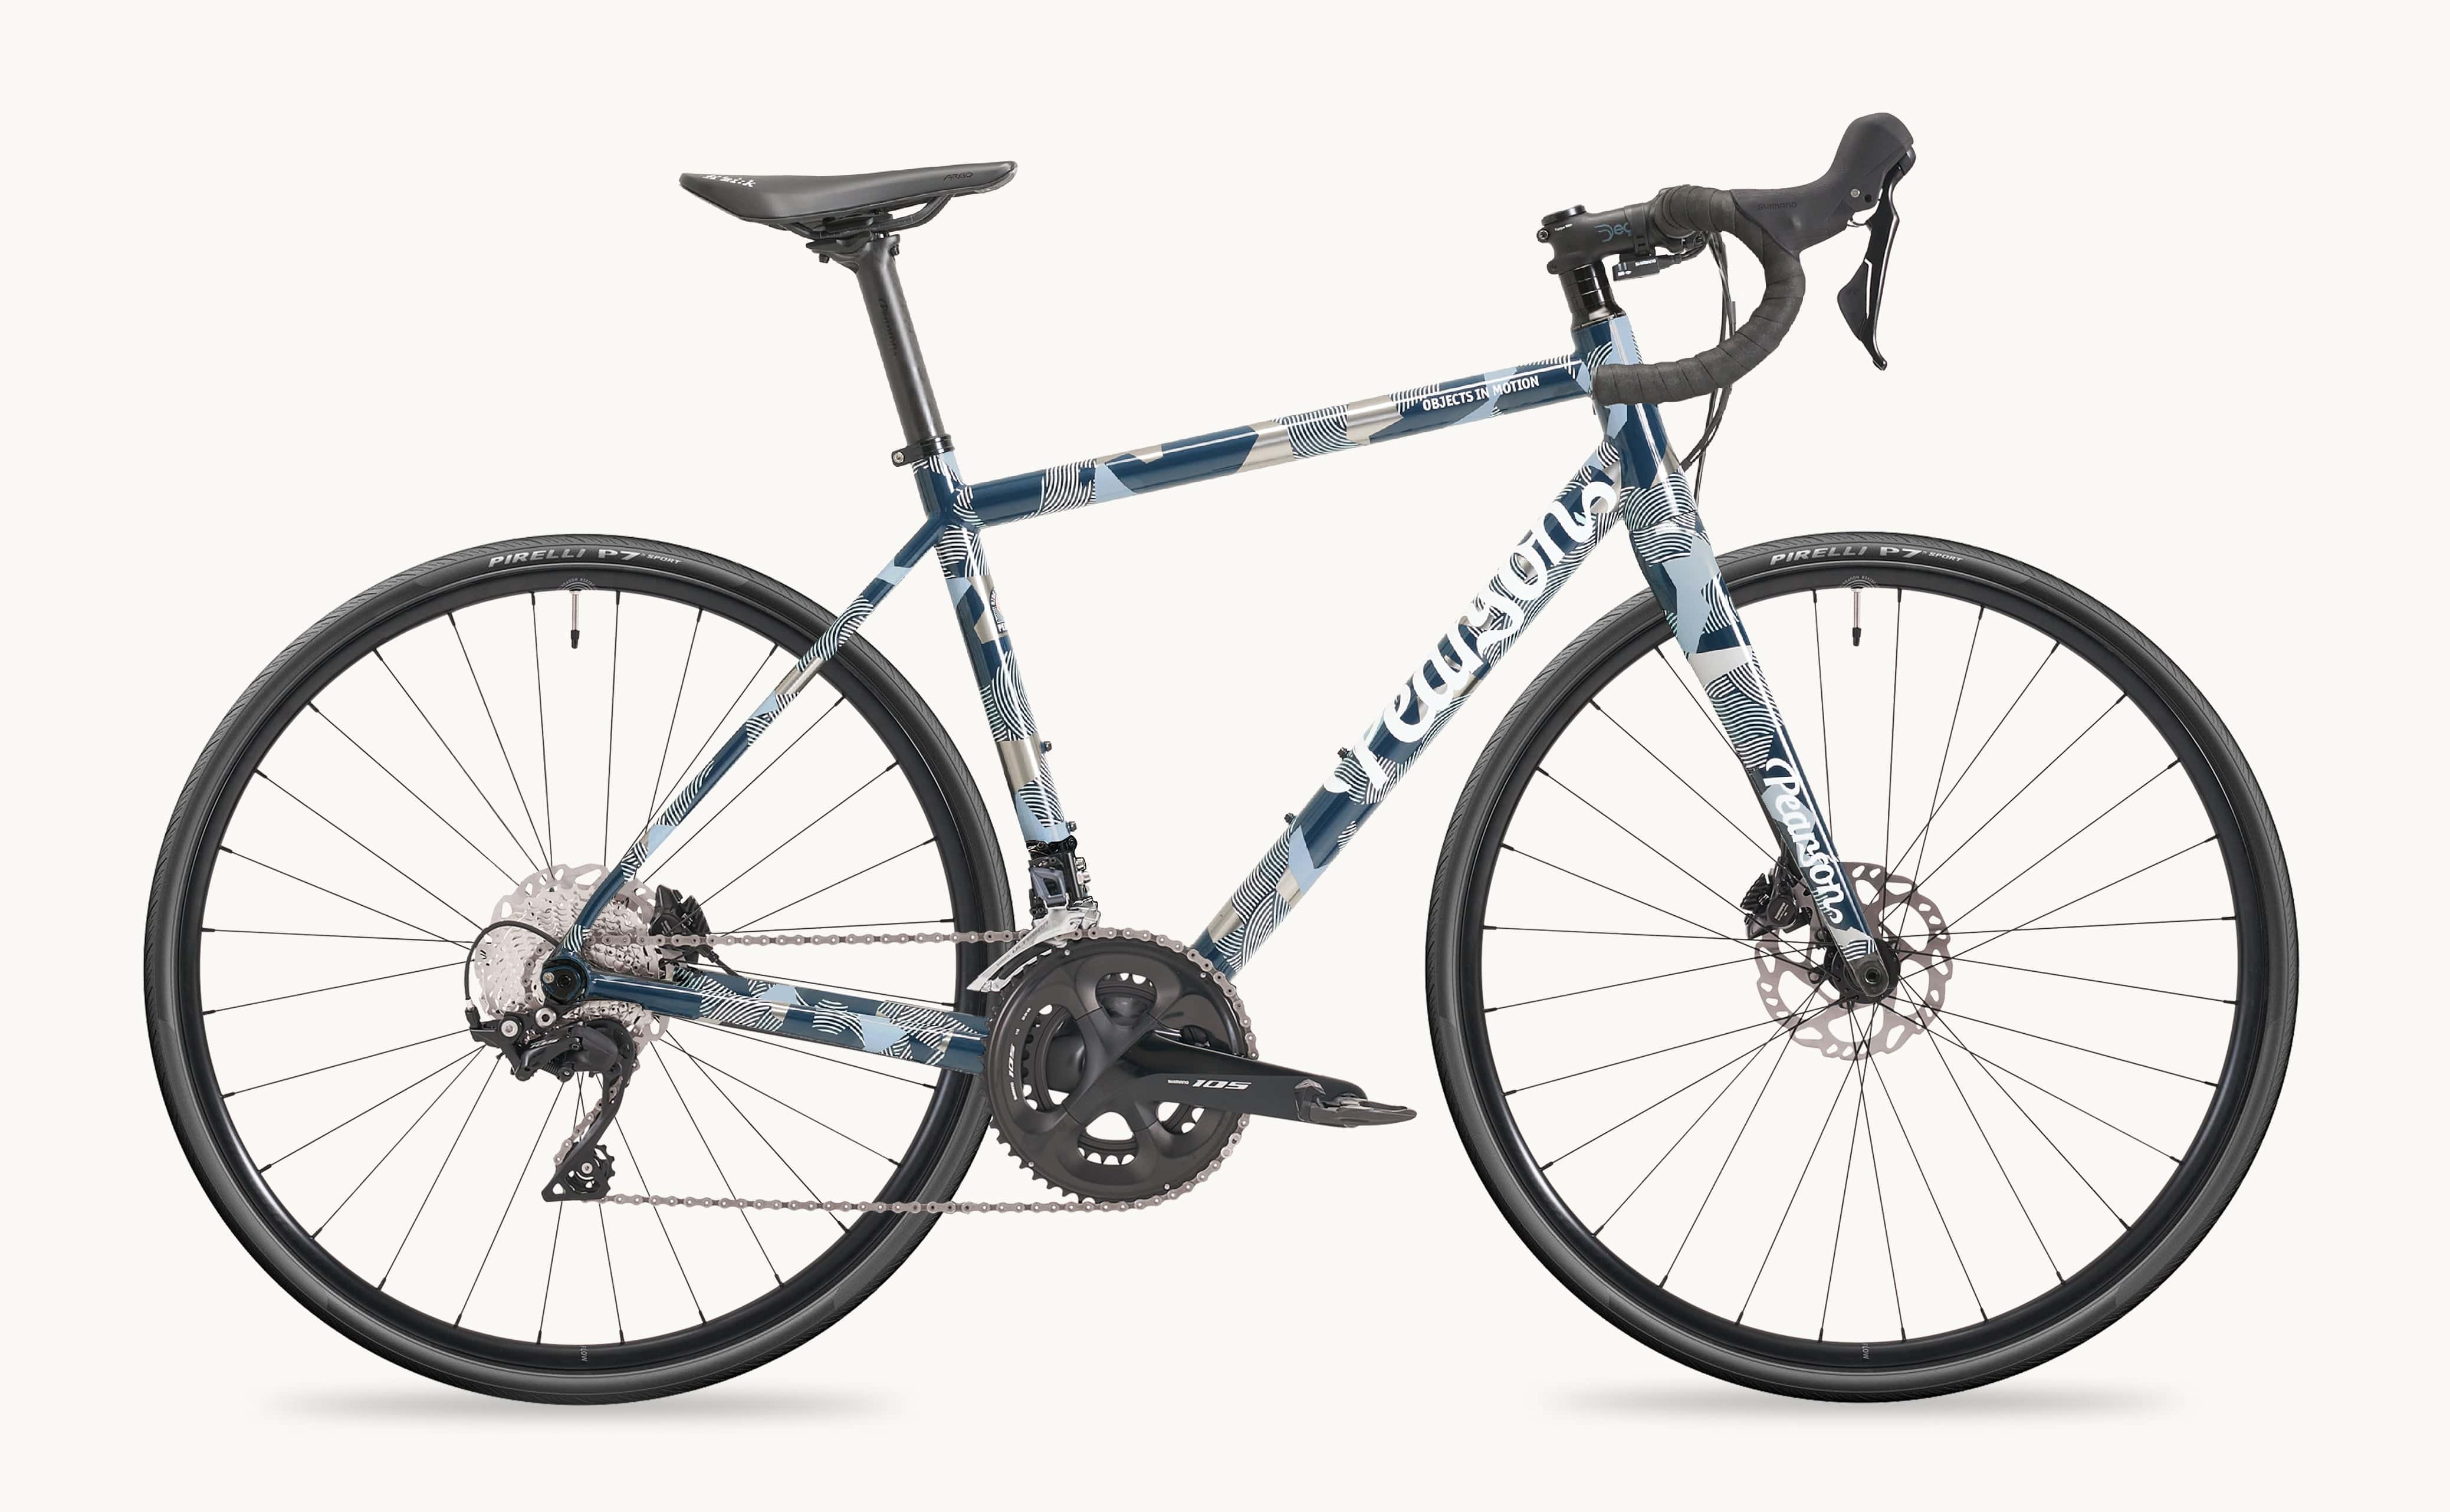 Pcs  Special Offer: Objects In Motion Shimano 105 - Titanium Road Bike  X-large / Blue Camo / Shimano 105 Mechanical - Pearson Ebb And Flow Alloy Wheels